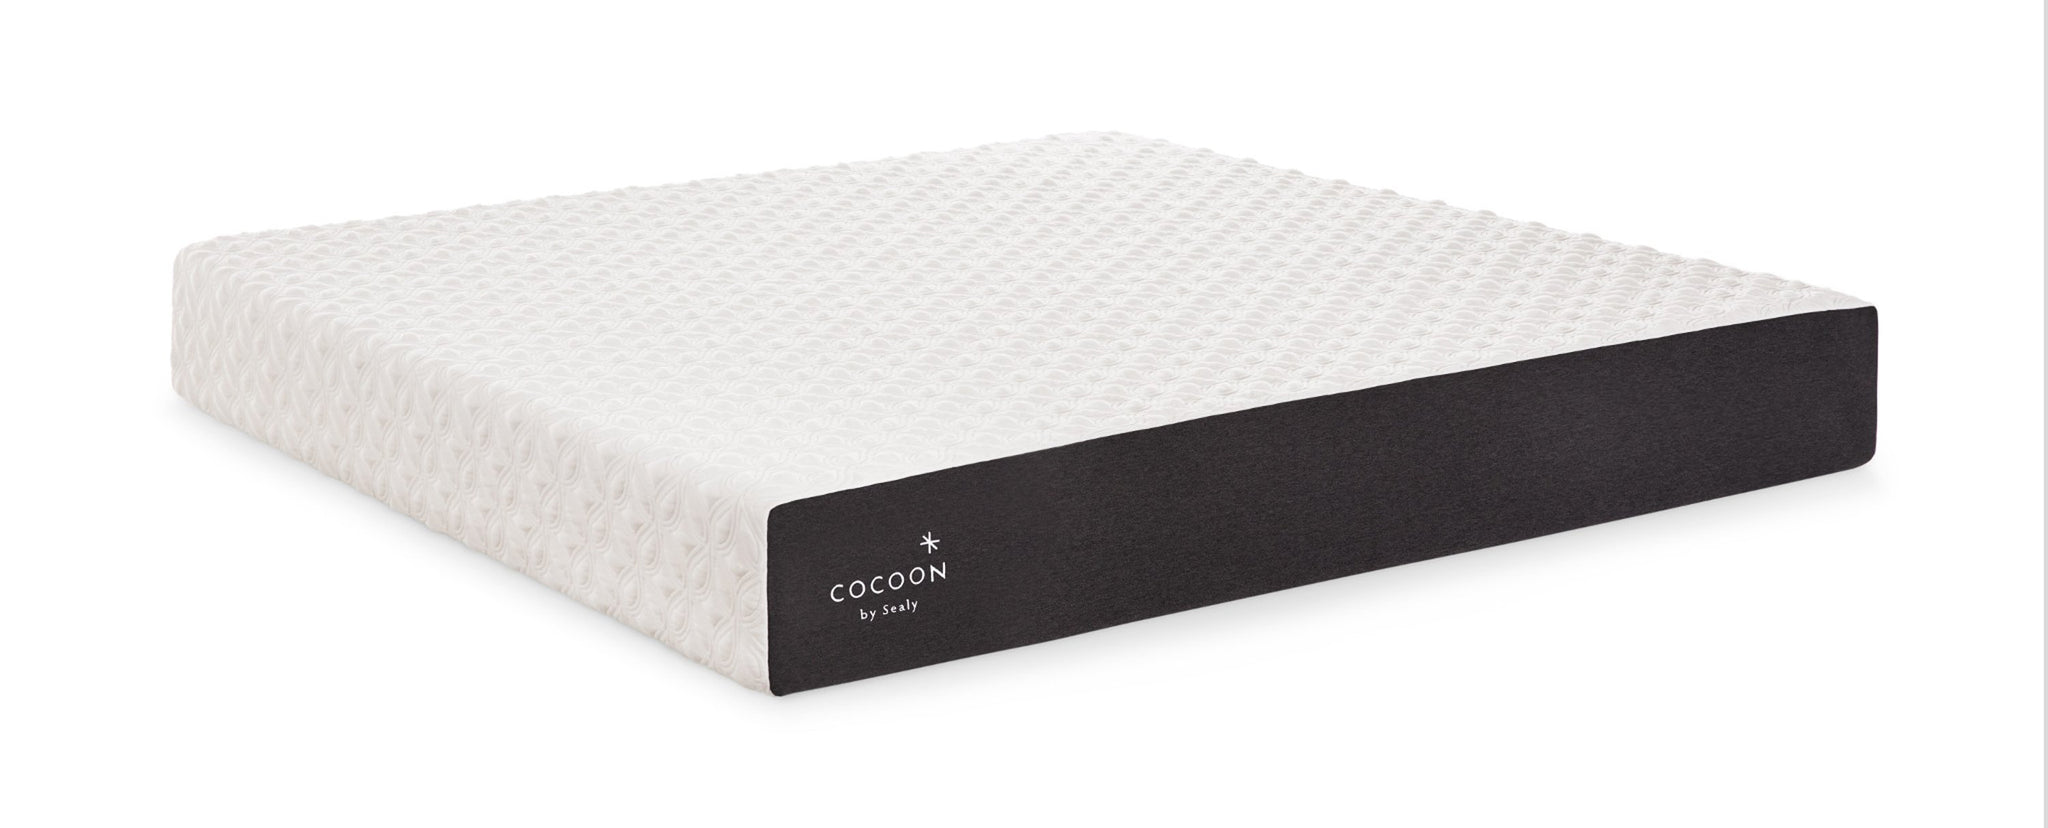 Picture of Cocoon Mattress by Sealy - Queen - 10" Thickness